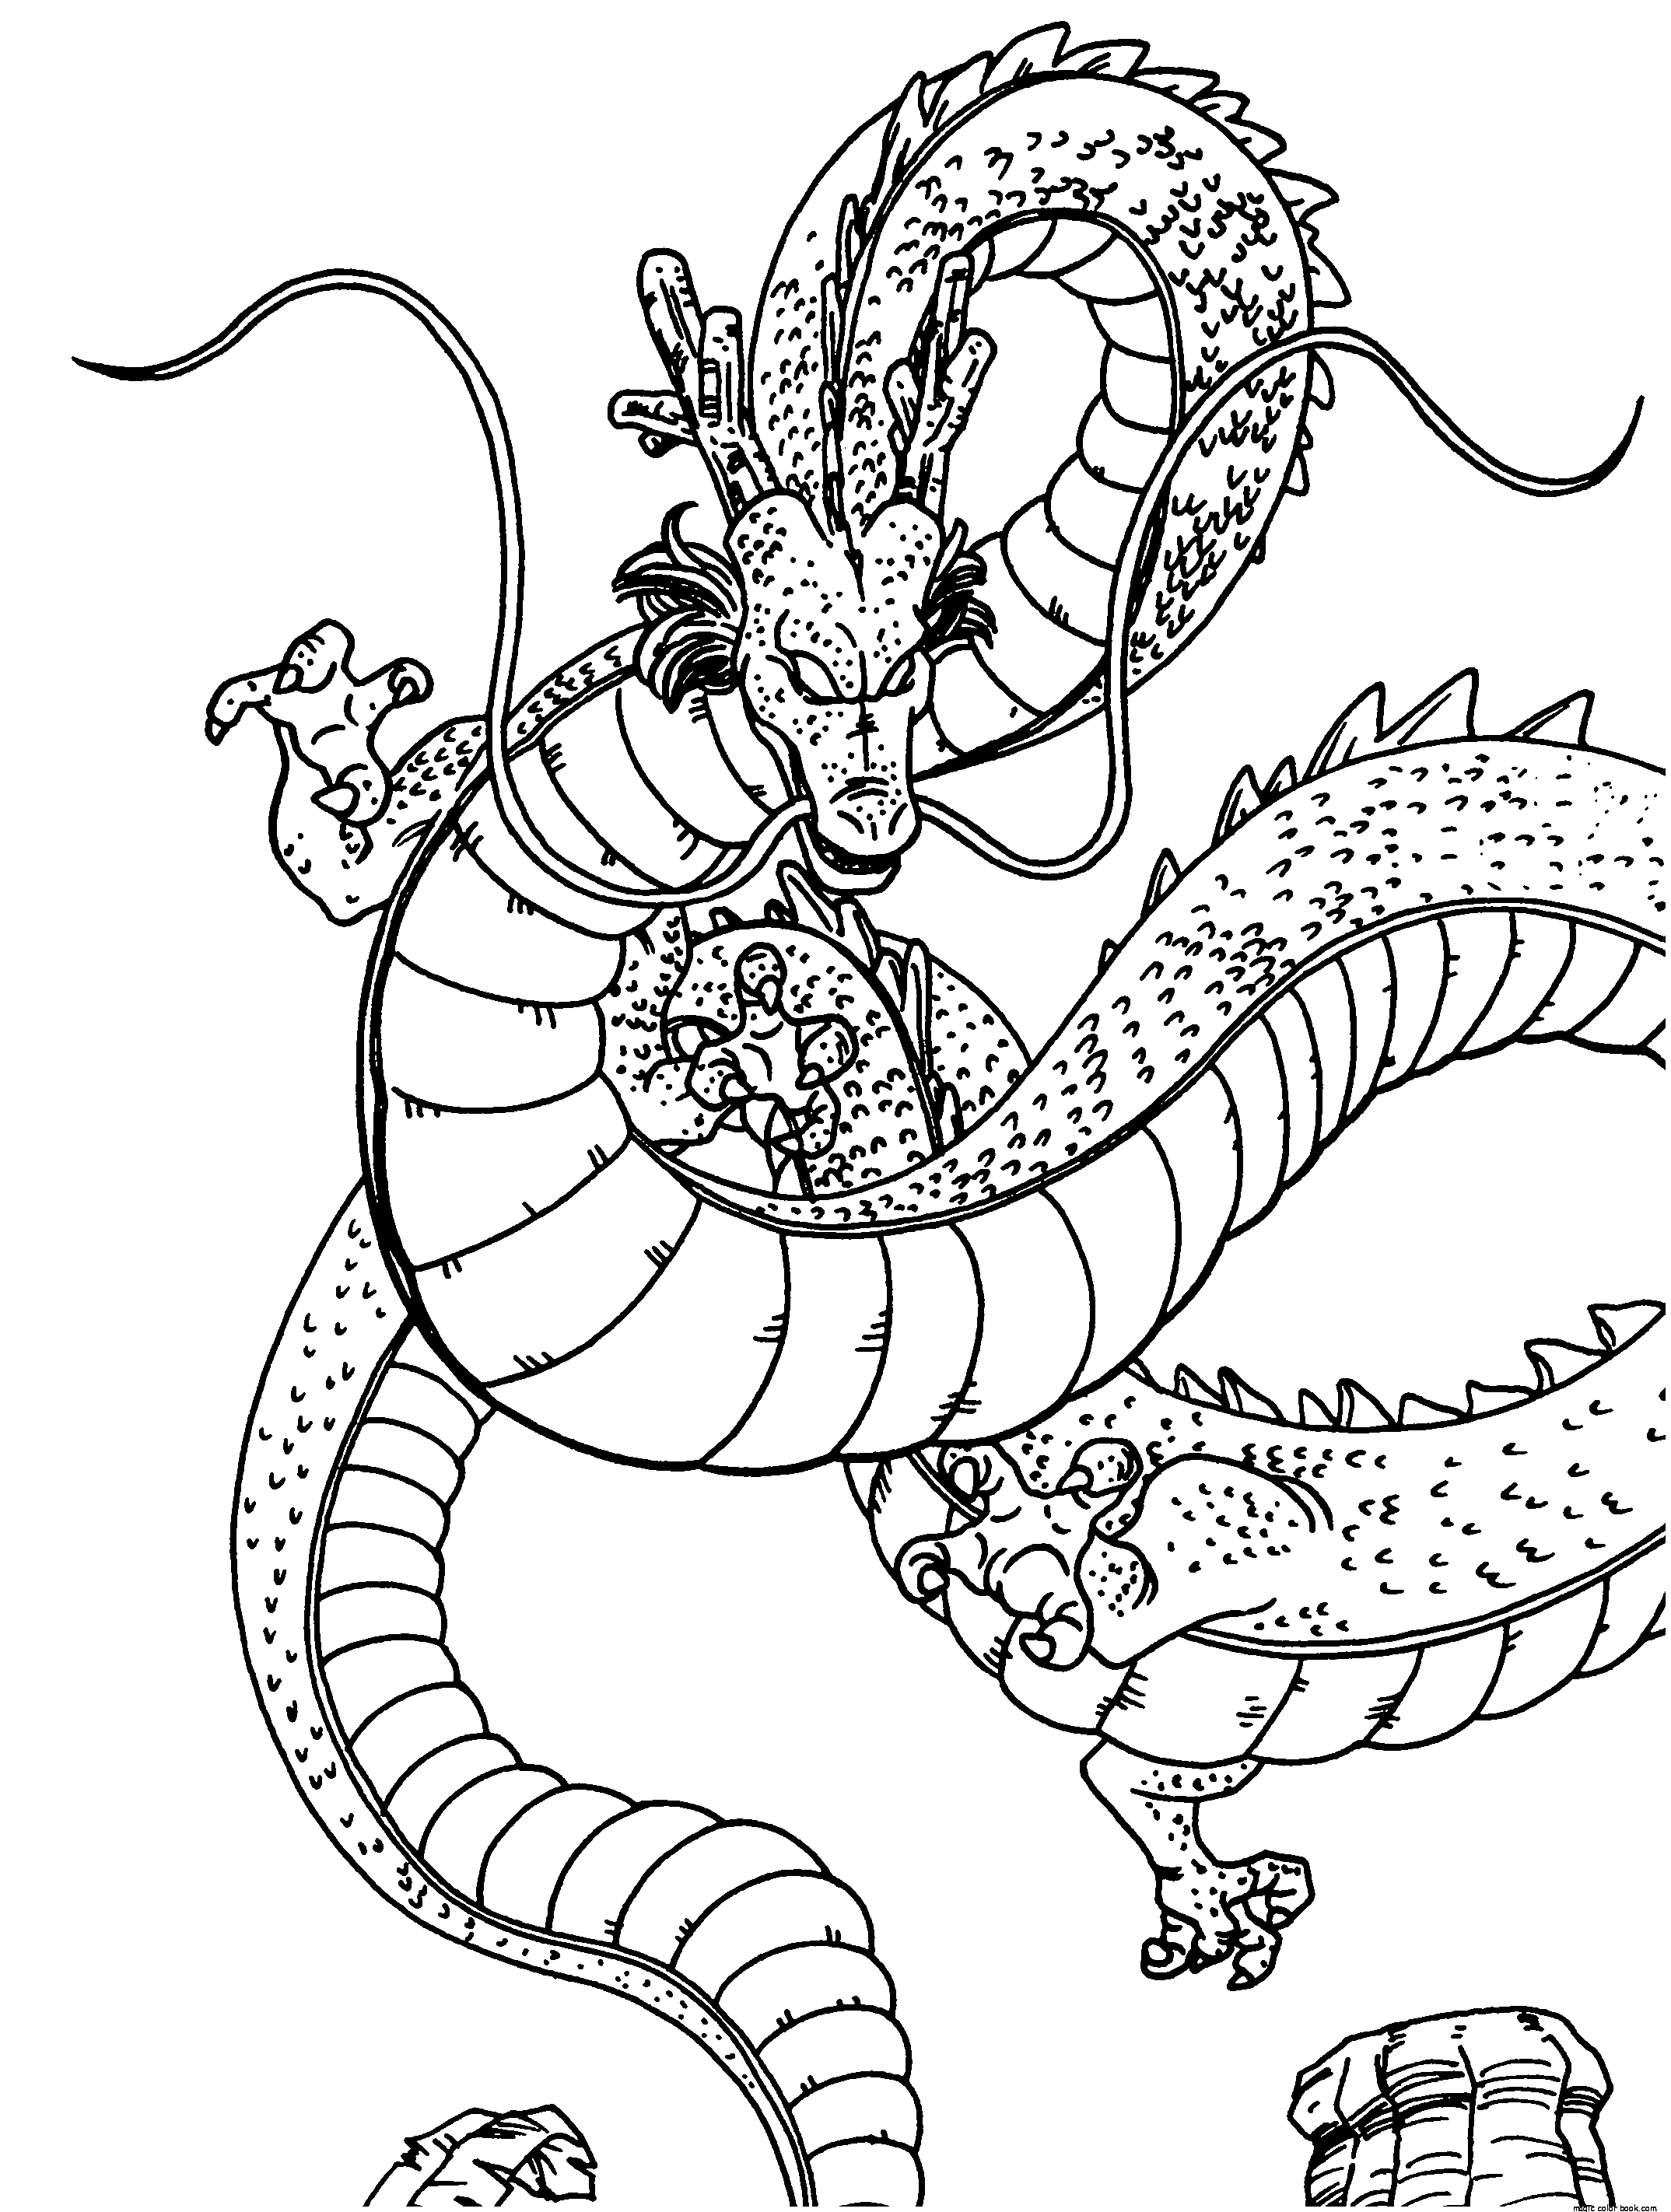 dbz colouring pages top 20 free printable dragon ball z coloring pages online pages colouring dbz 